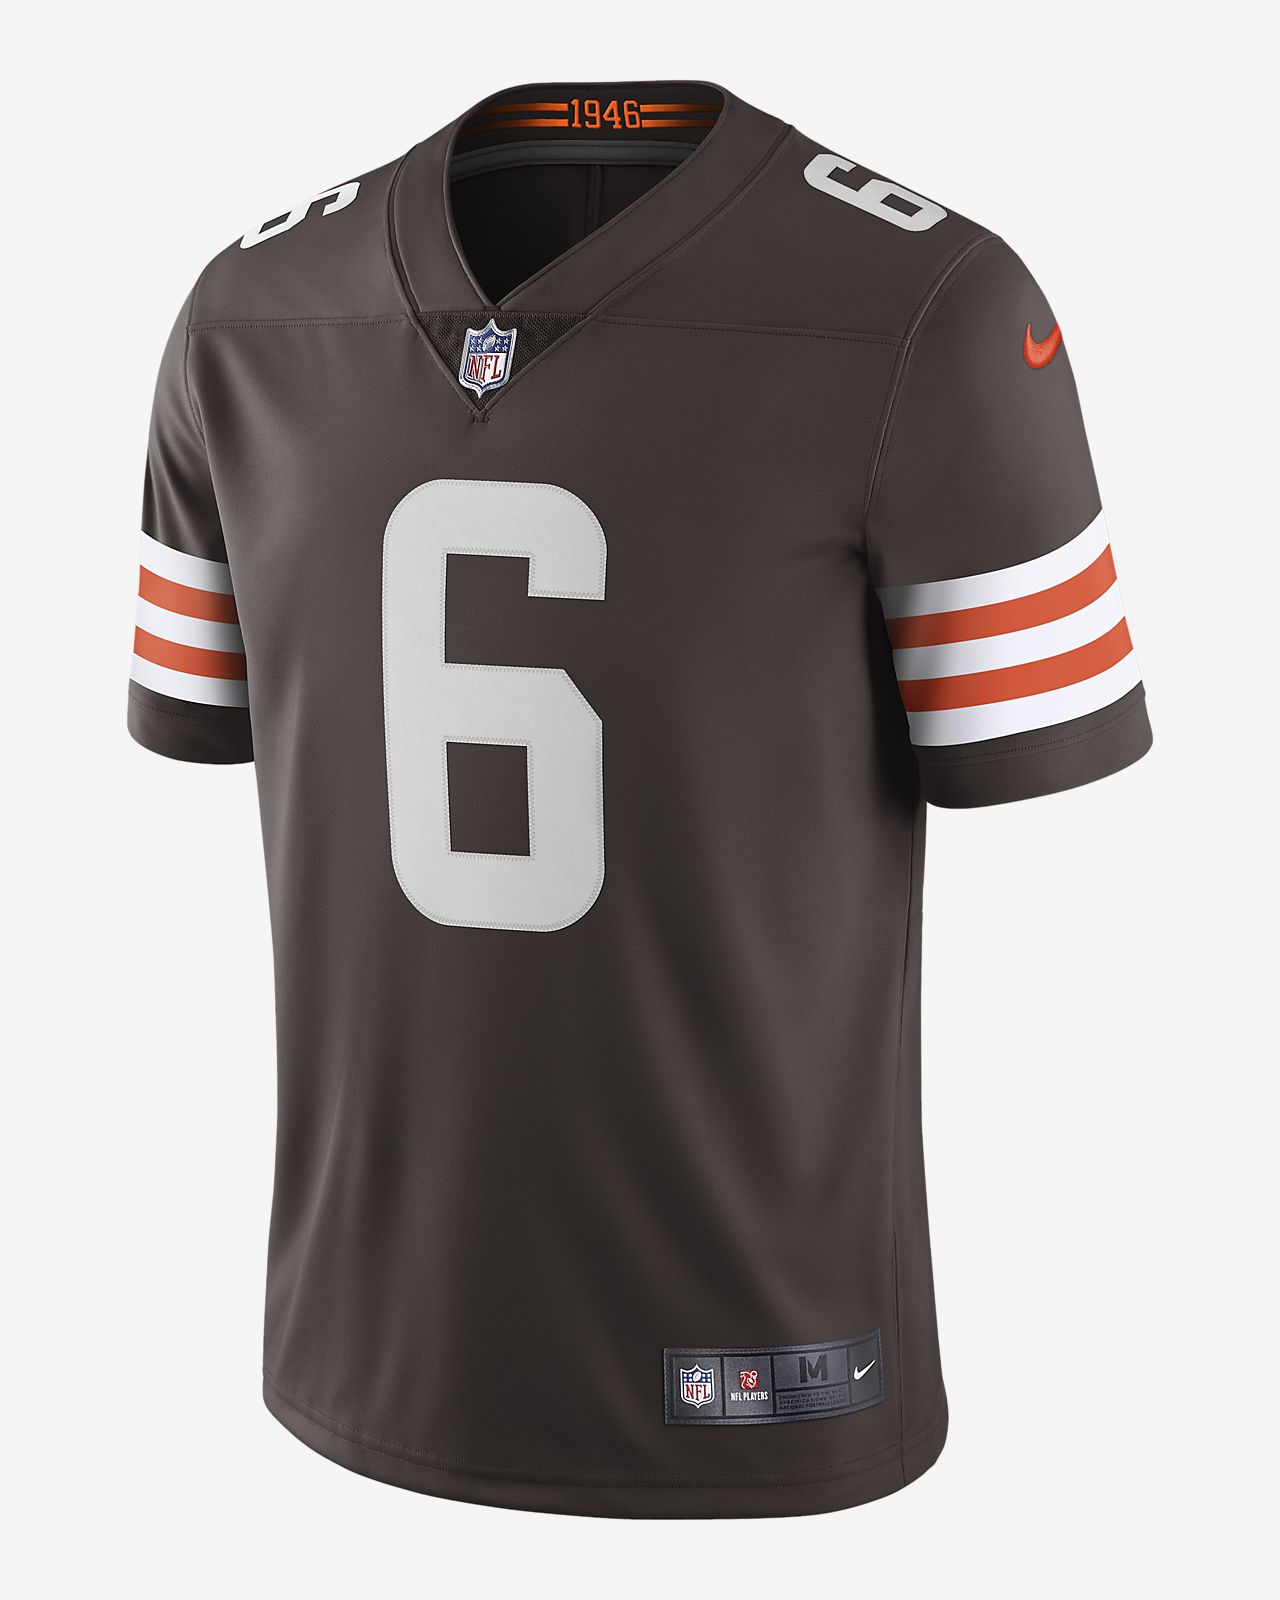 nike cleveland browns jersey